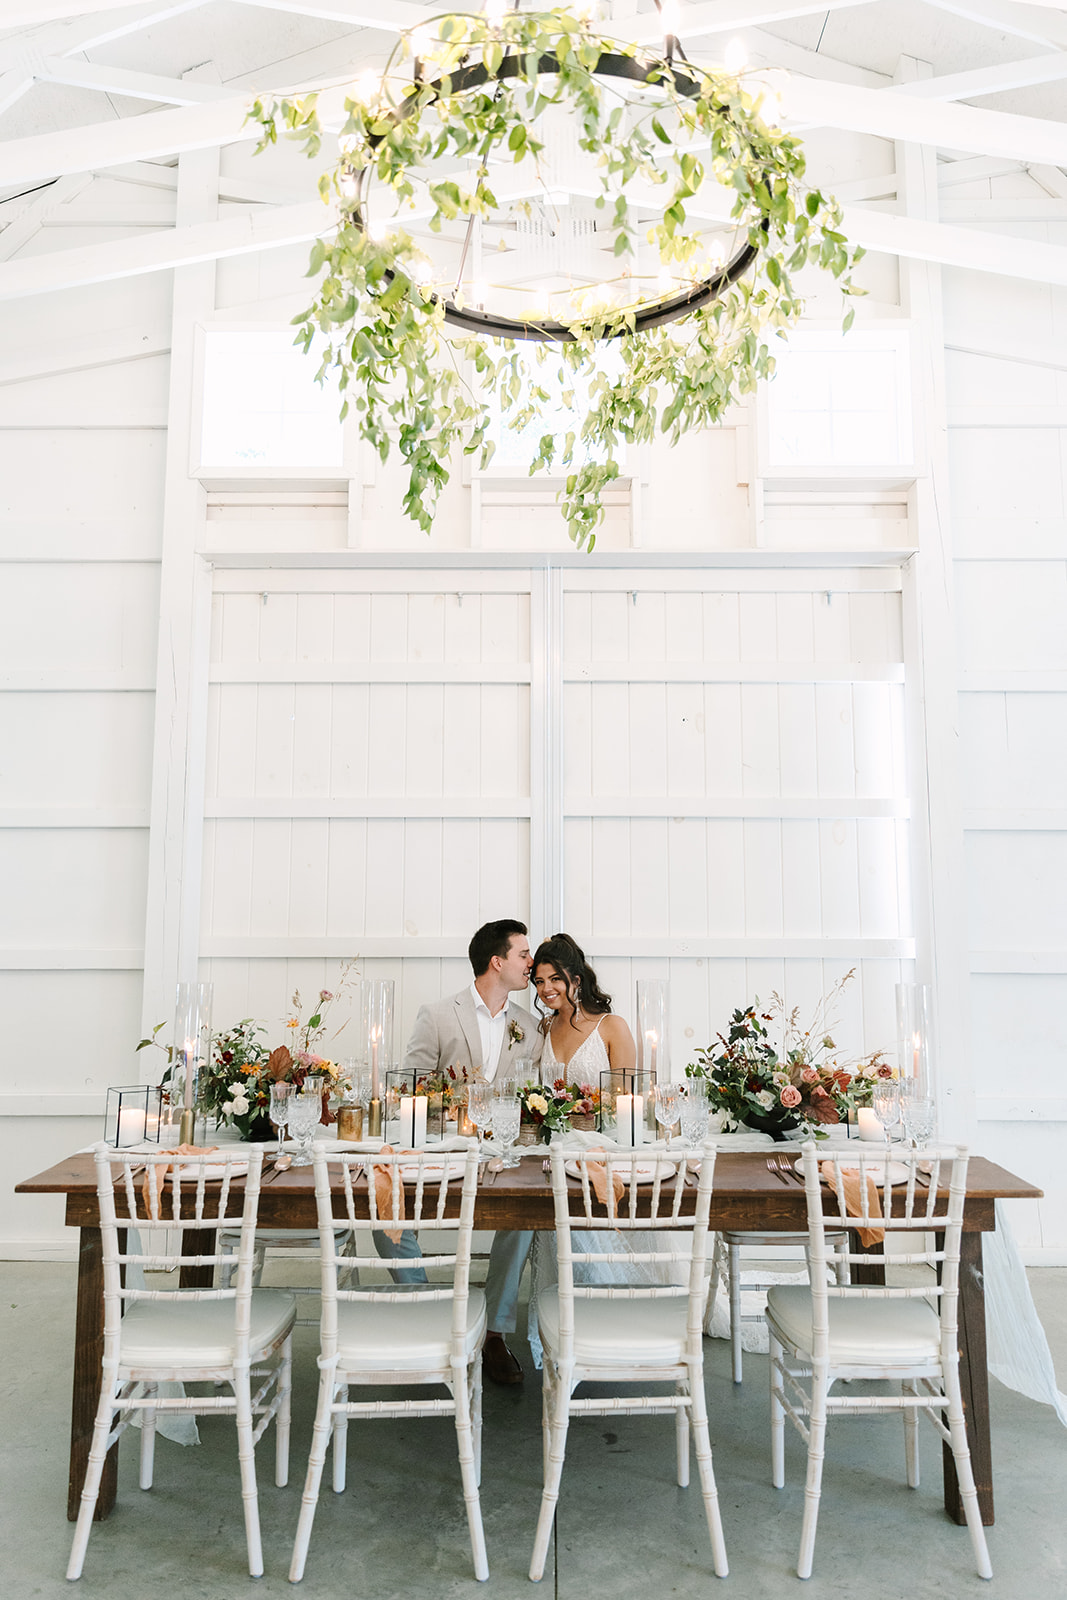 bride and groom cuddling at their wedding table filled with wedding decor